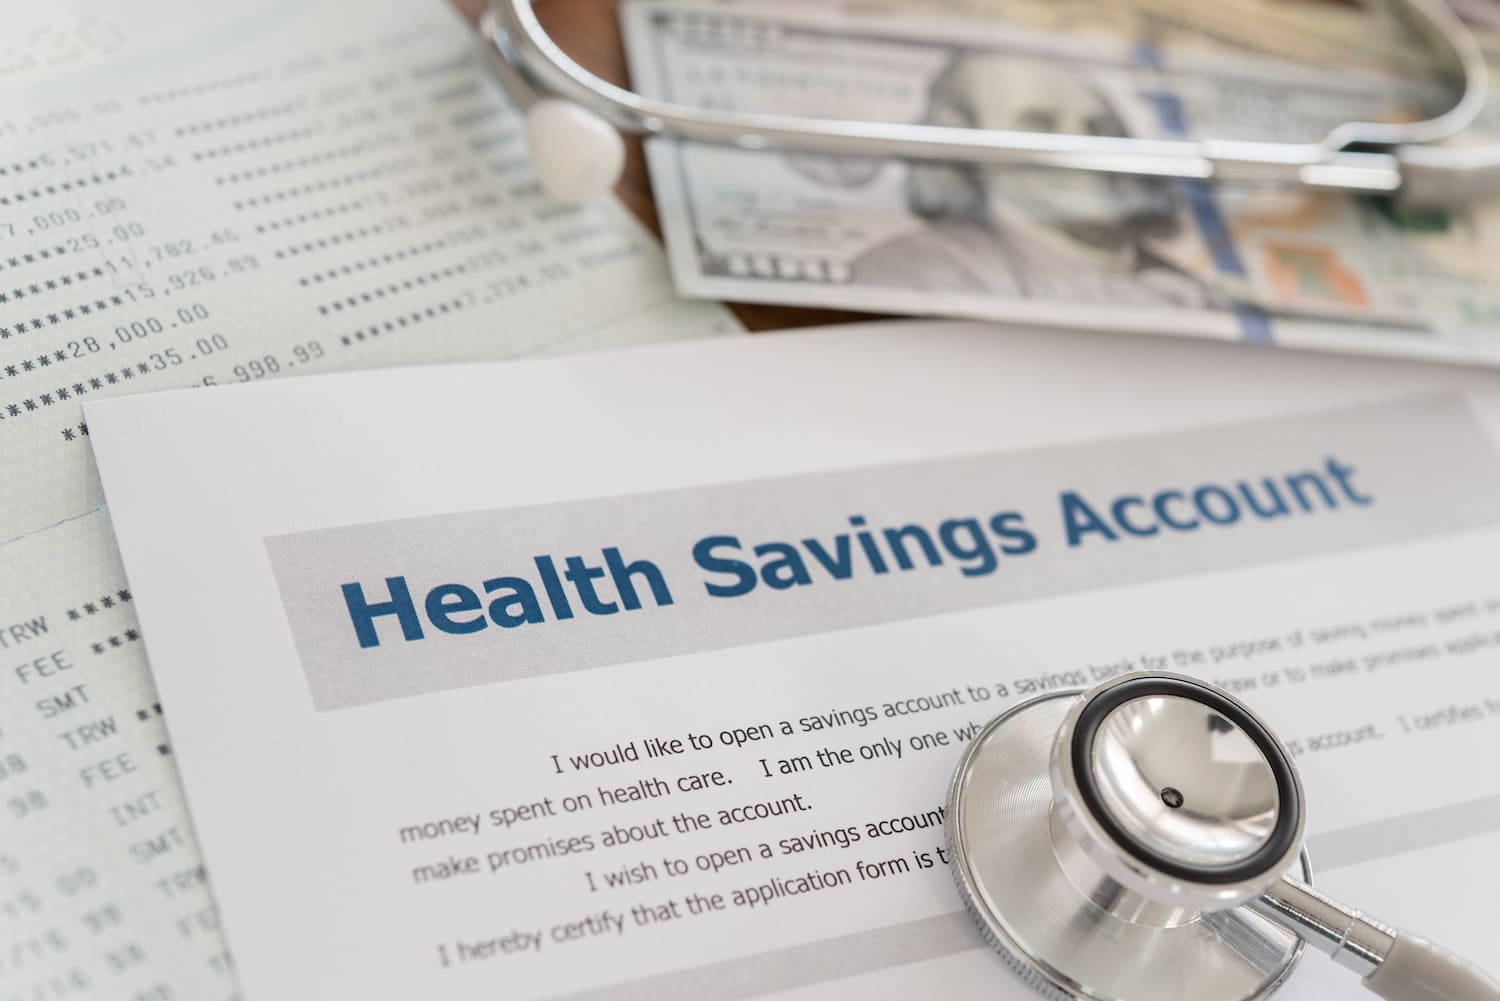 health savings account HSA concept with application form, dollar money, stethoscope, bank account on desk.